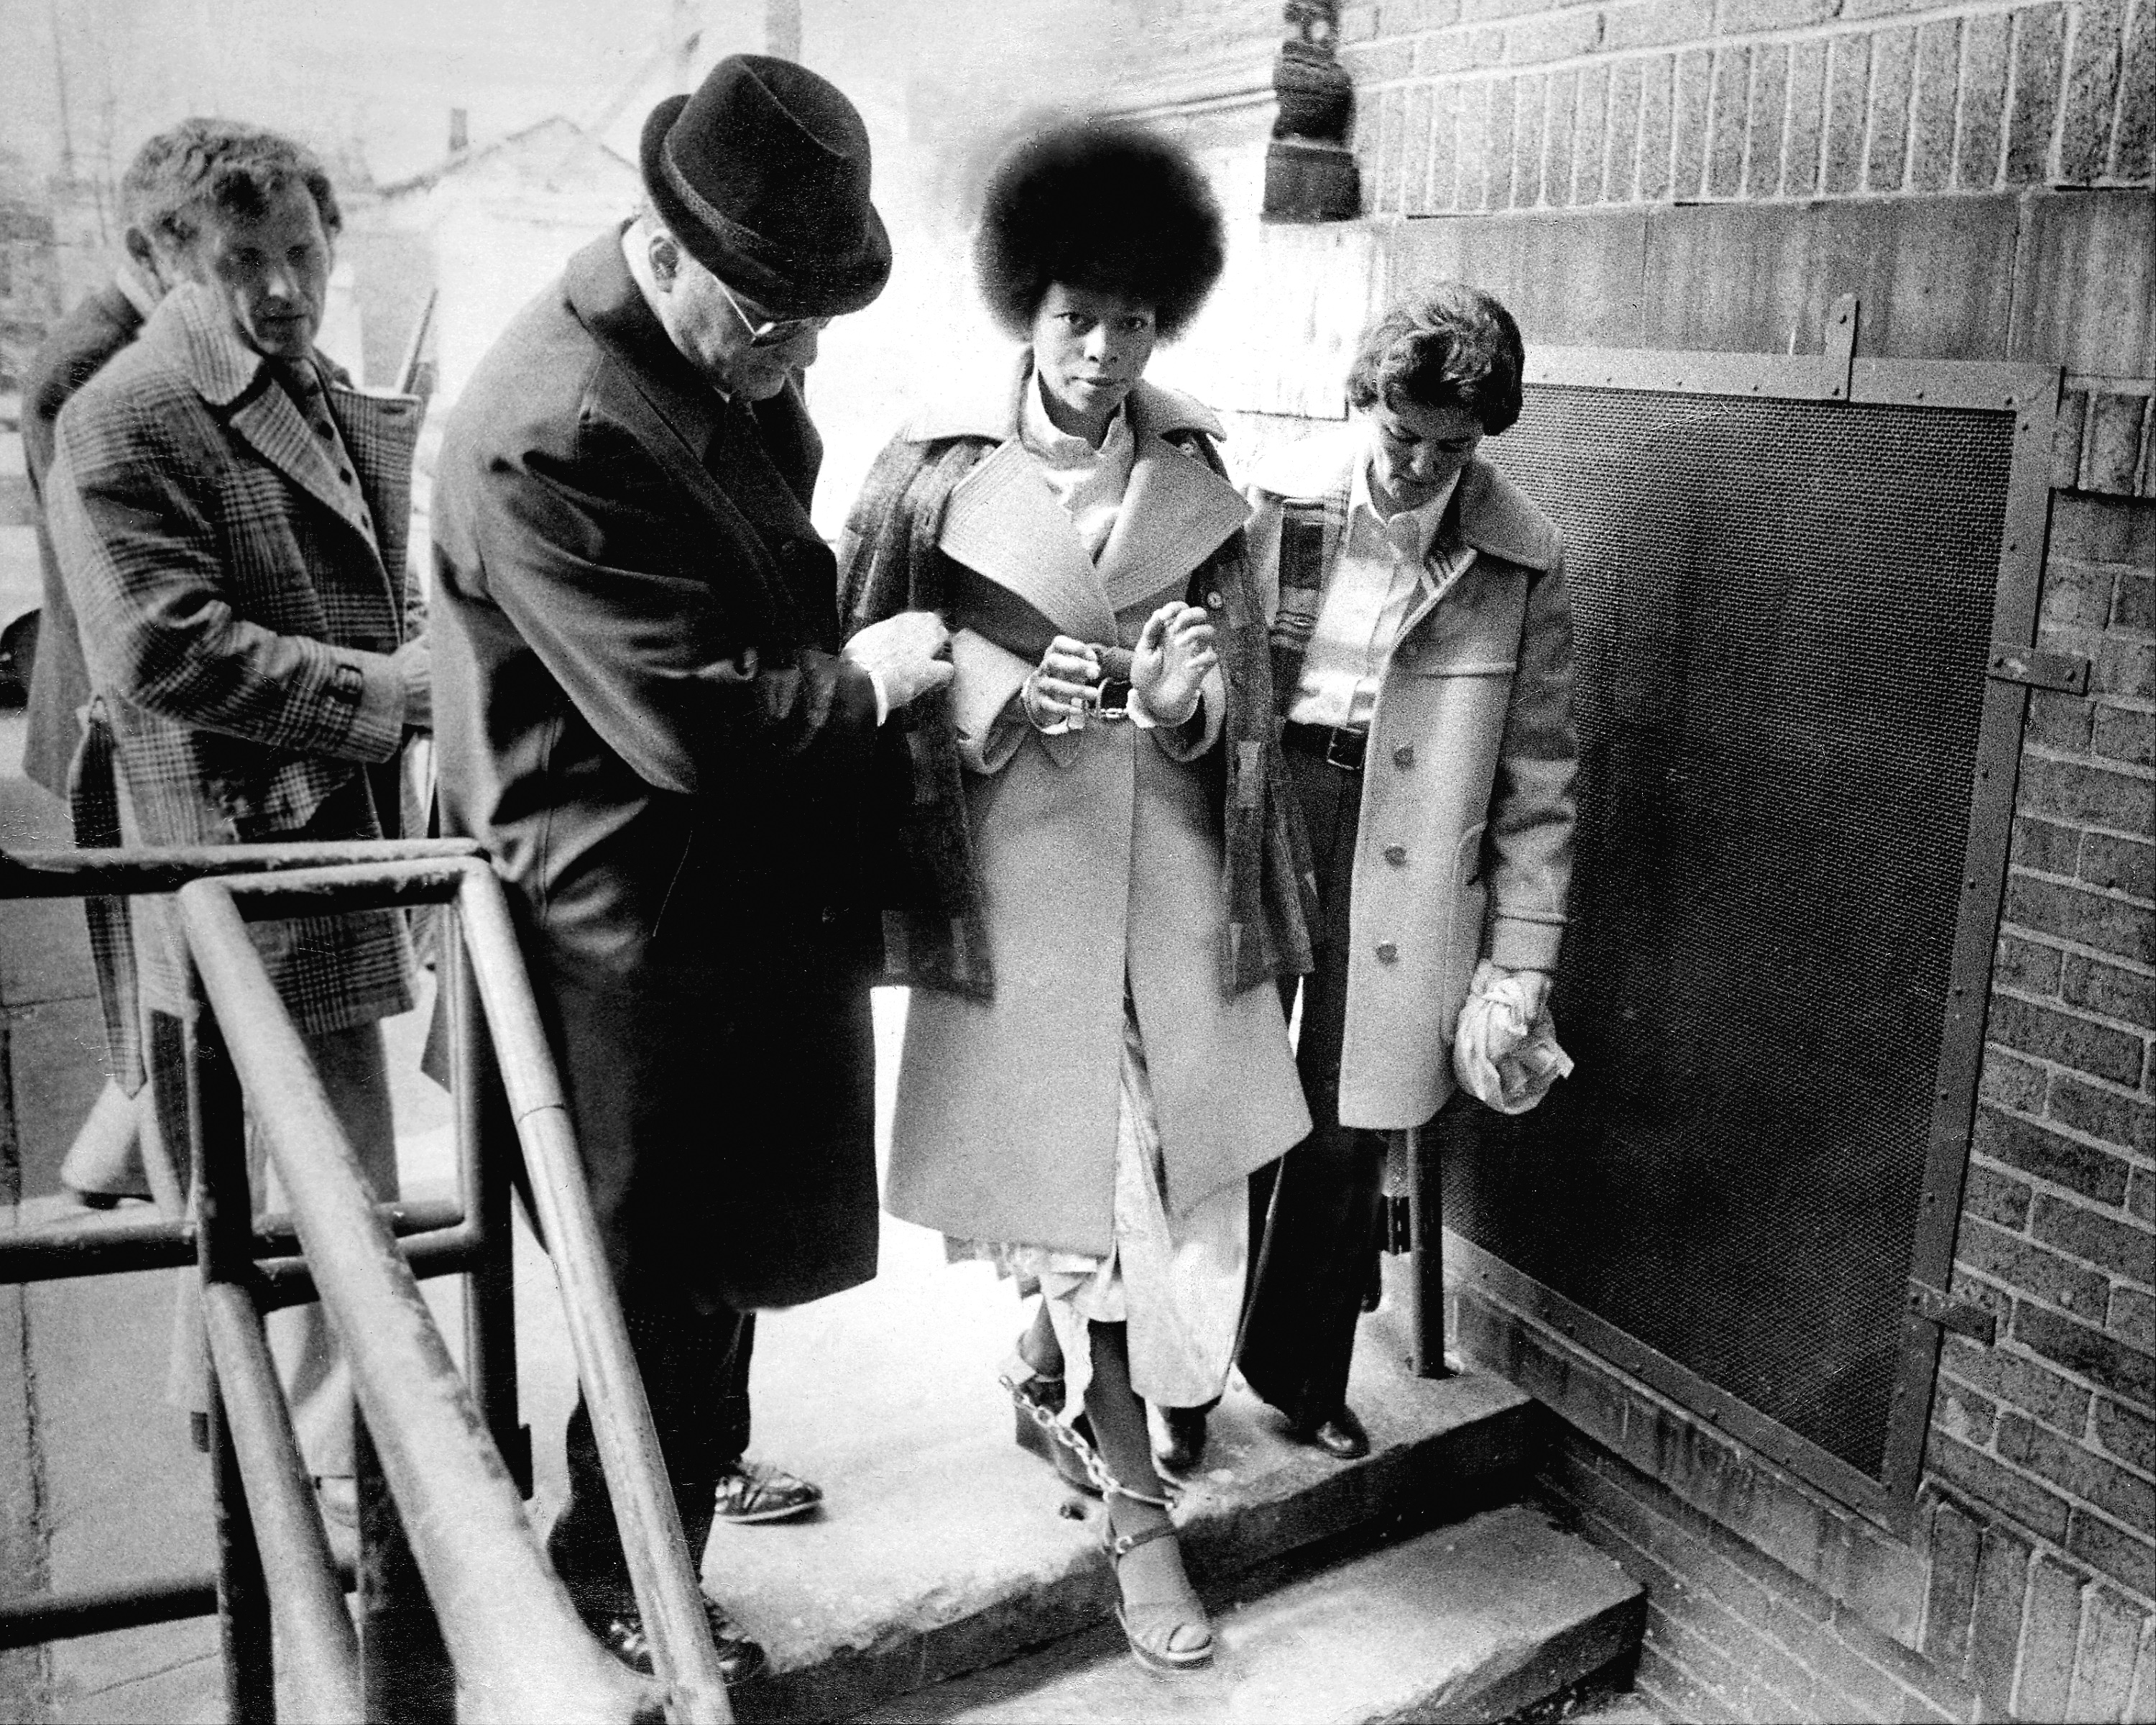 UNITED STATES - JANUARY 29: In a caravan of eight cars bearing heavily armed state police and county officers, JoAnne Chesimard, the reputed "soul" of the Black Liberation Army, was taken chained handcuffs and leg irons from Riker's Island prison in New York City ot the Middlesex County jail to await trail in the murder of state trooper Werner Foerster. (Photo by Frank Hurley/NY Daily News Archive via Getty Images)